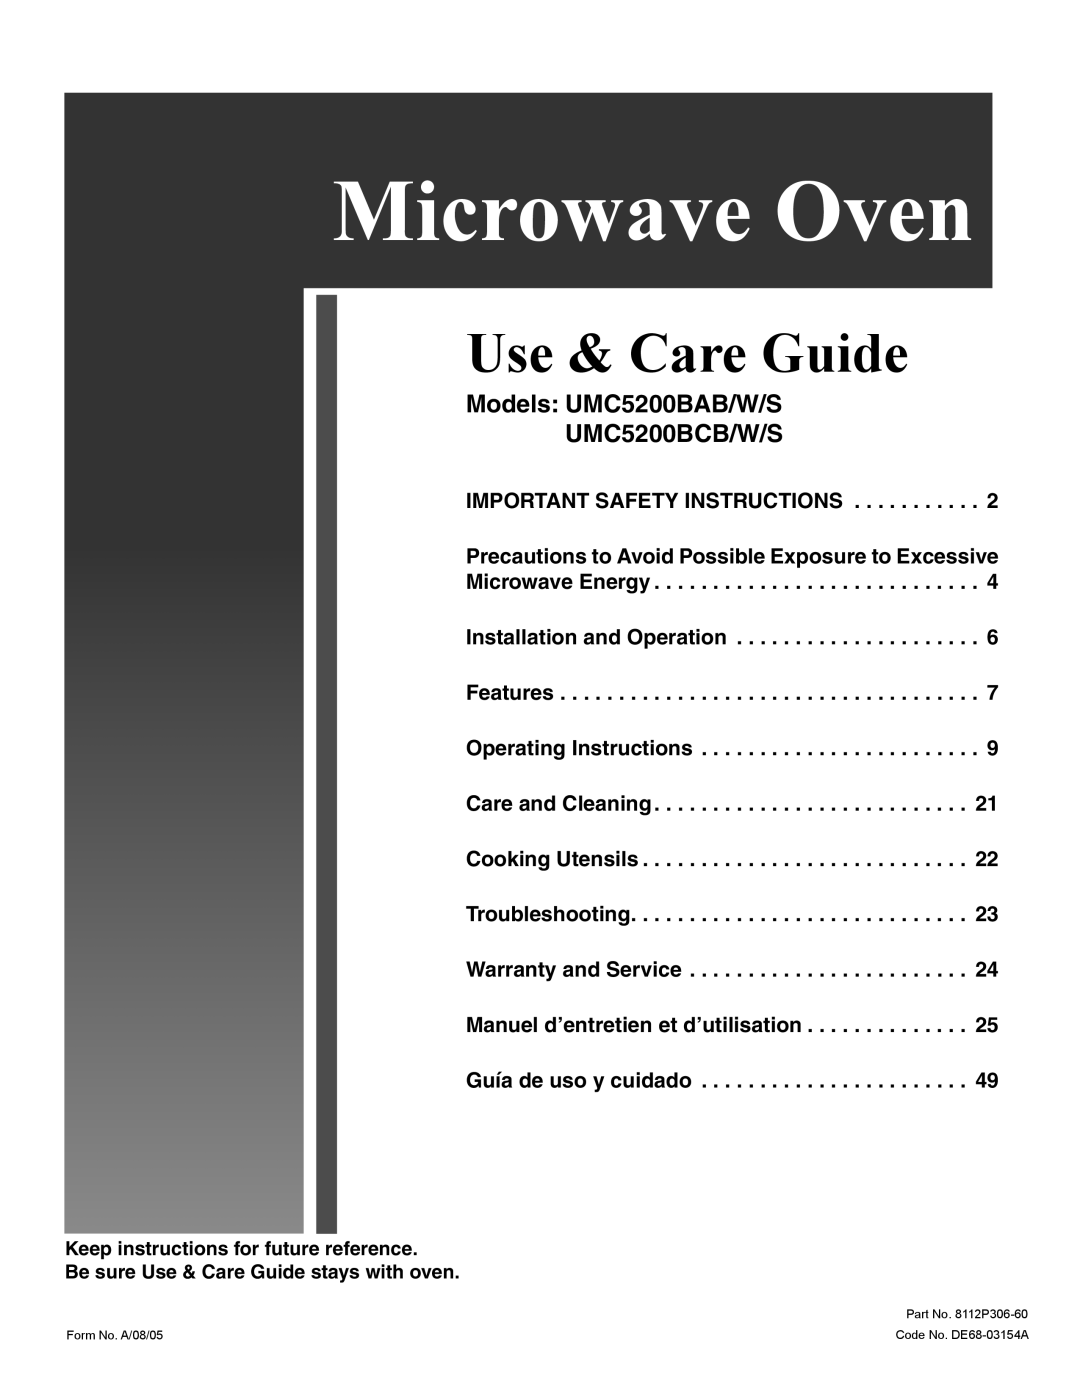 Maytag important safety instructions Use & Care Guide, Models: UMC5200BAB/W/S UMC5200BCB/W/S, Microwave Oven 